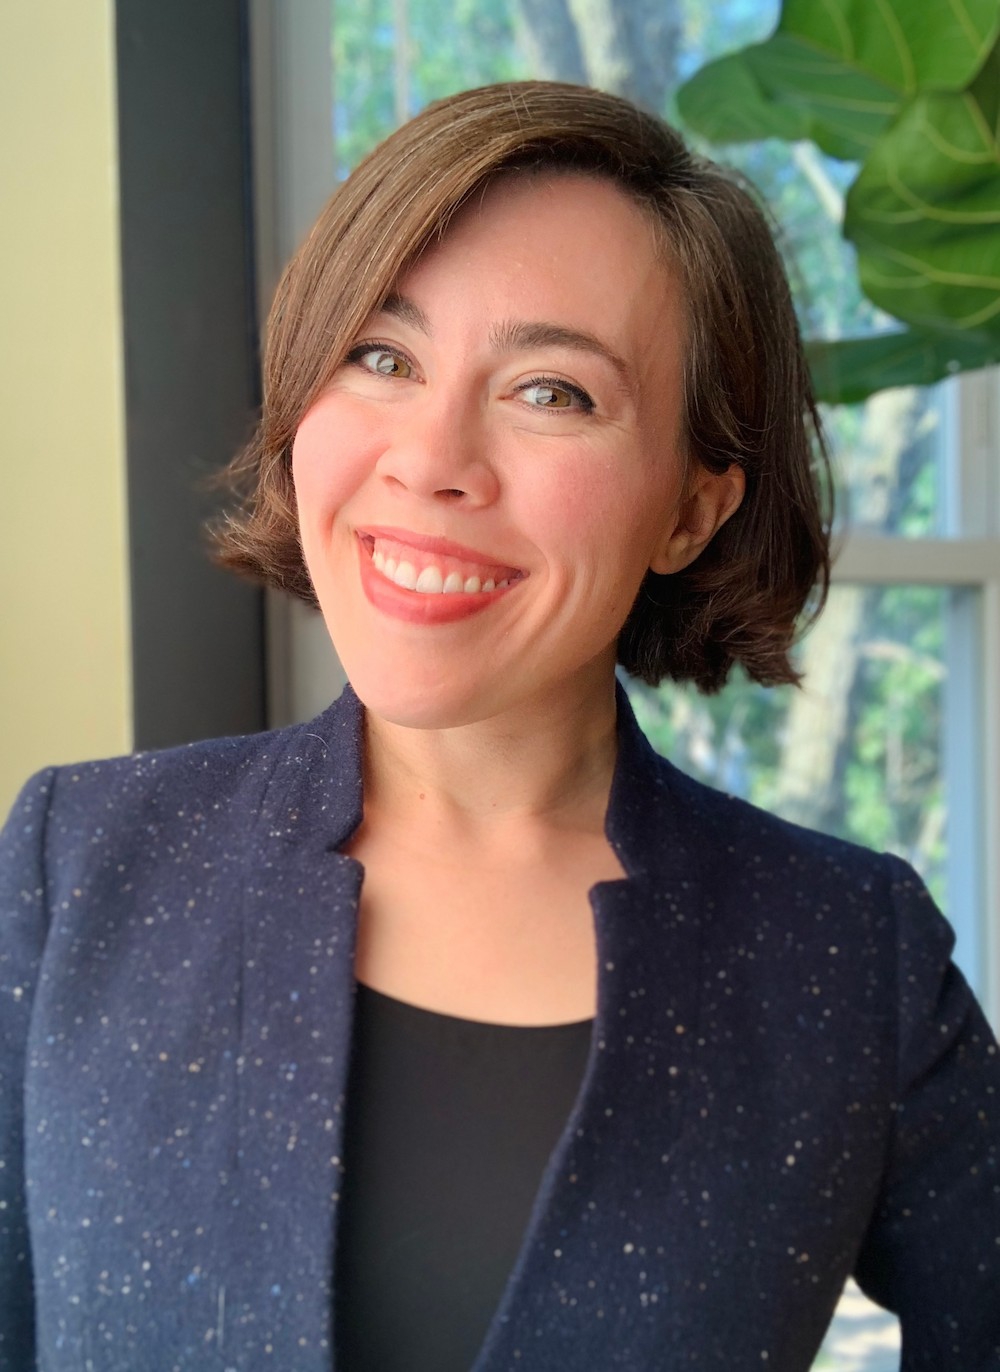 Dr. Addie Shrodes, a white femme with chin-length brown hair and brown eyes, smiles as they look at the camera. They are wearing a navy speckled blazer and a black shirt. Behind her is a fiddle leaf fig tree leaf and a window overlooking trees.